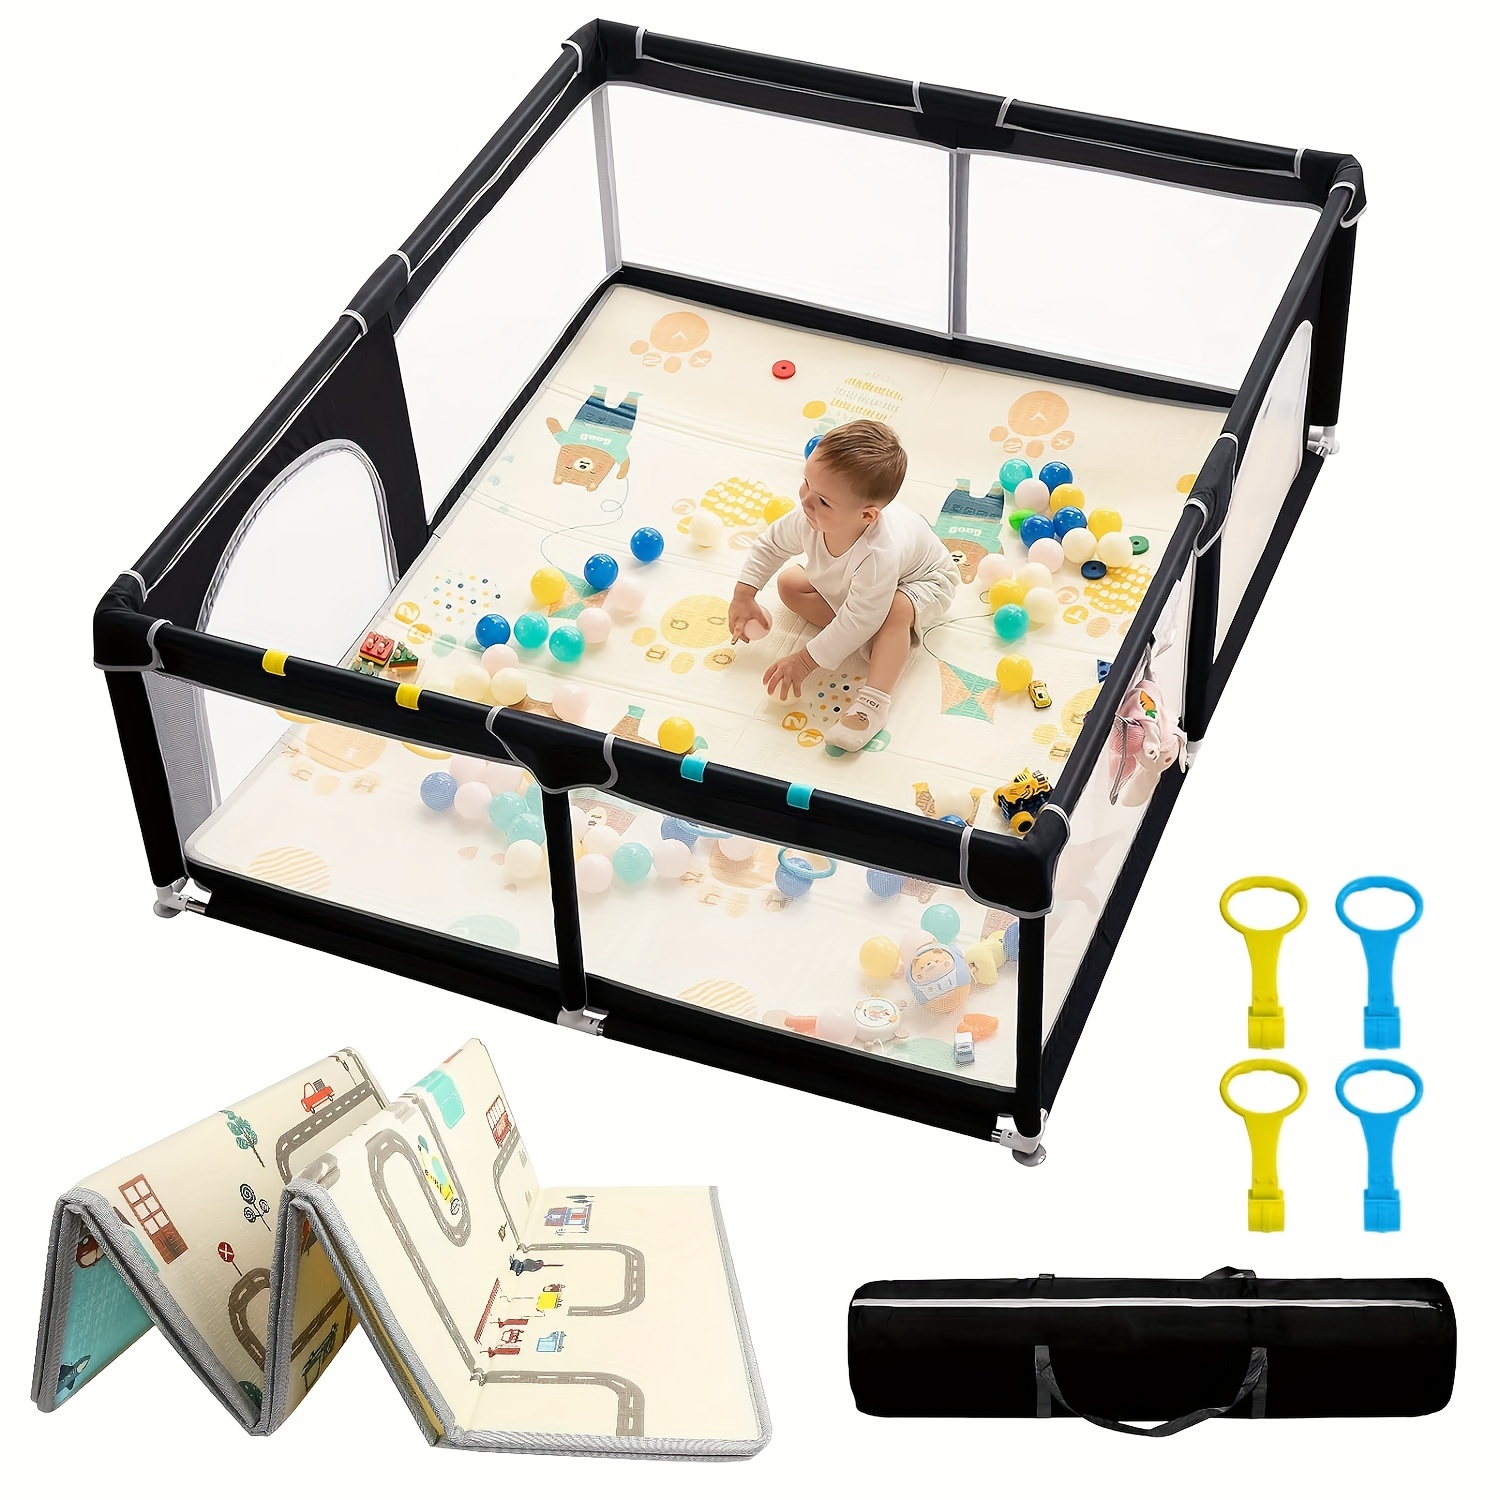 

Playpen ( With/without Cushion) 70"" X 60"", Extra Large Playground, Safe Playpen, Indoor And Outdoor Kids' Activity Play Center With Non-slip Suction Cup And Zipper Door (black And Grey)